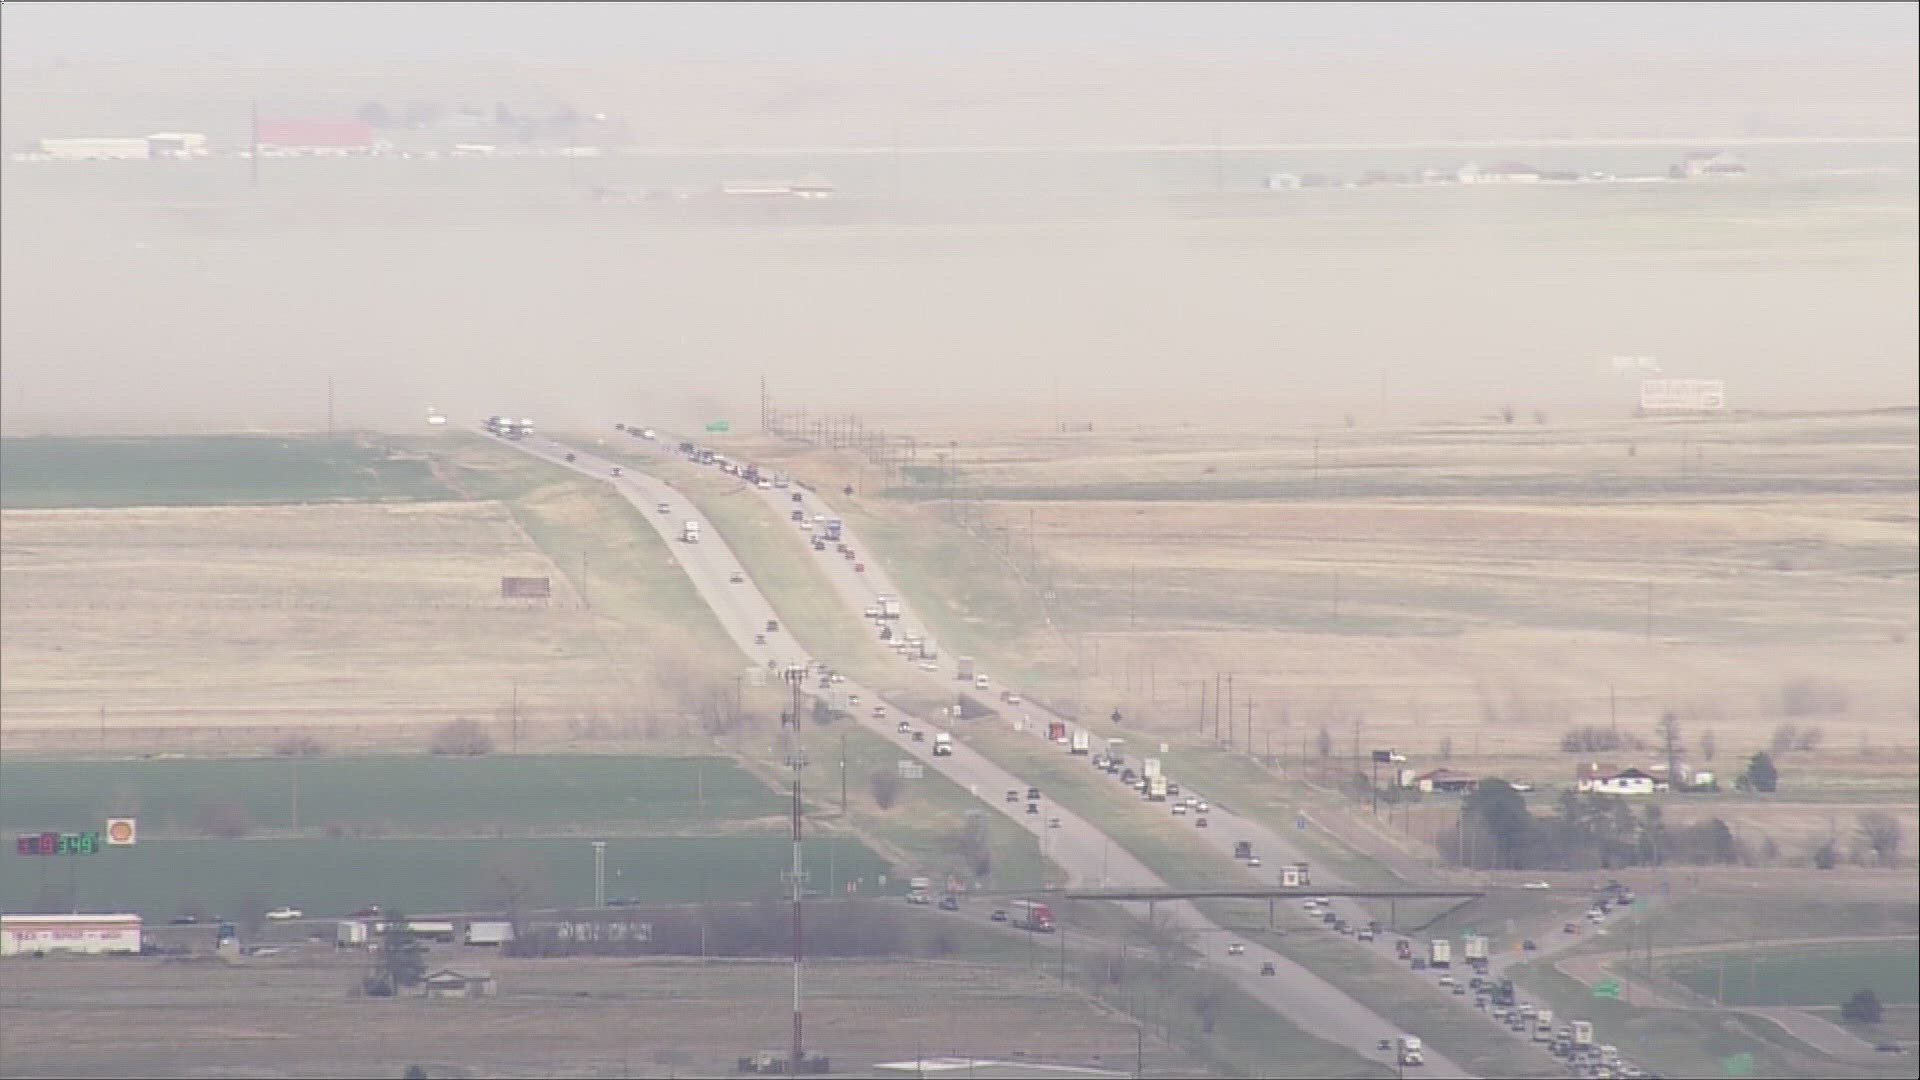 Sky9 shows a dust storm cross Interstate 70 near Bennett, east of the Denver metro area, on Friday afternoon.